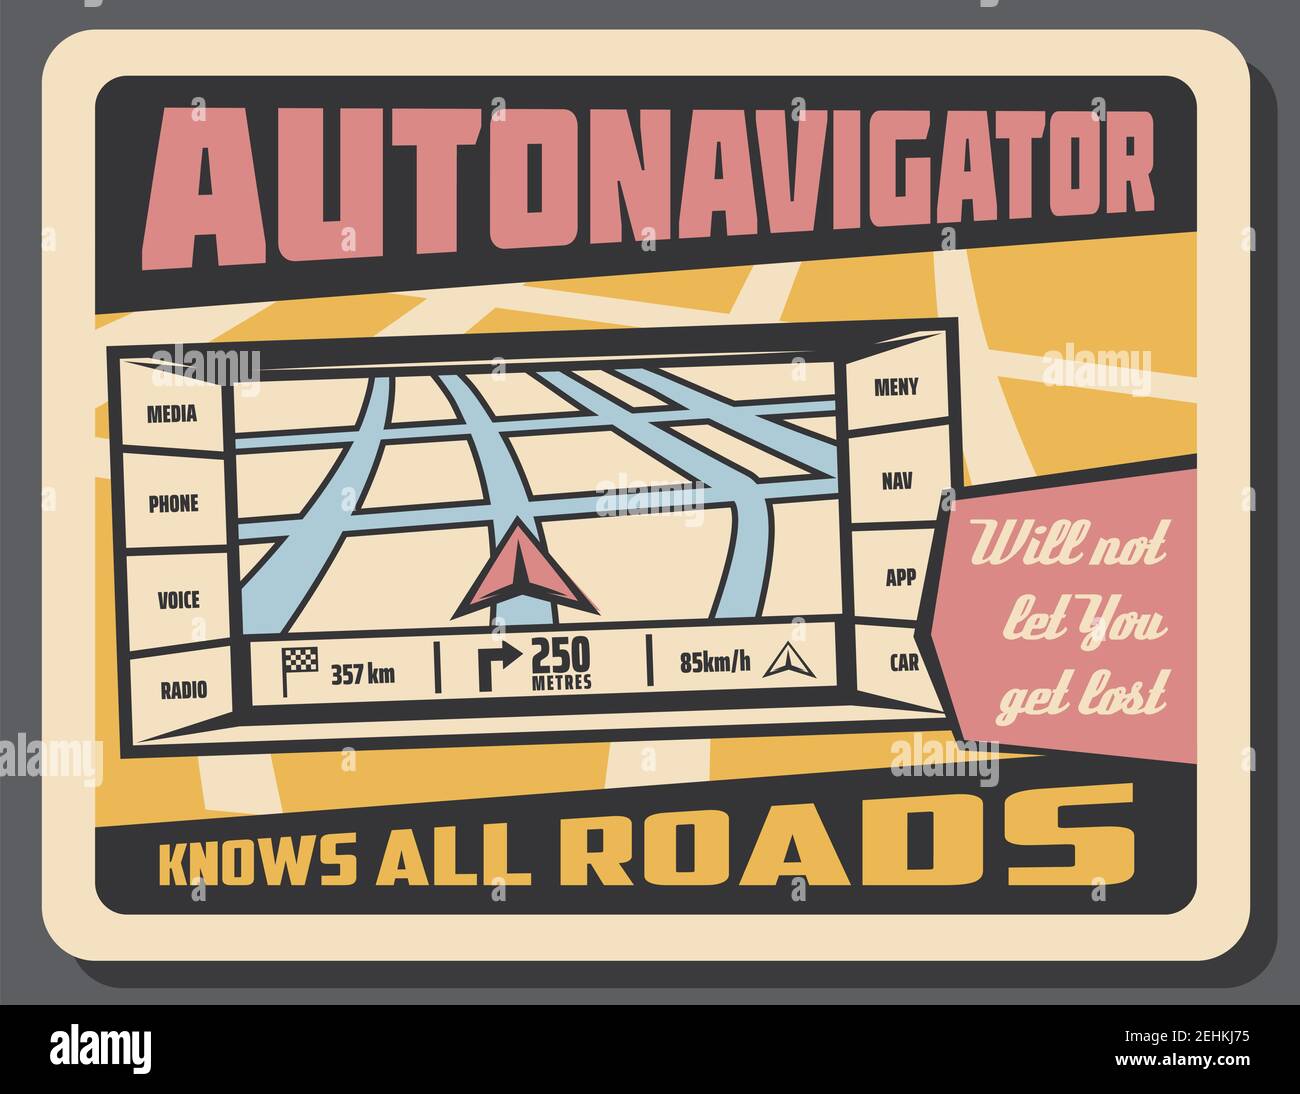 Car navigator retro poster. Automotive navigation system used to find direction. City highways and roads scheme with pointer that shows vehicle locati Stock Vector